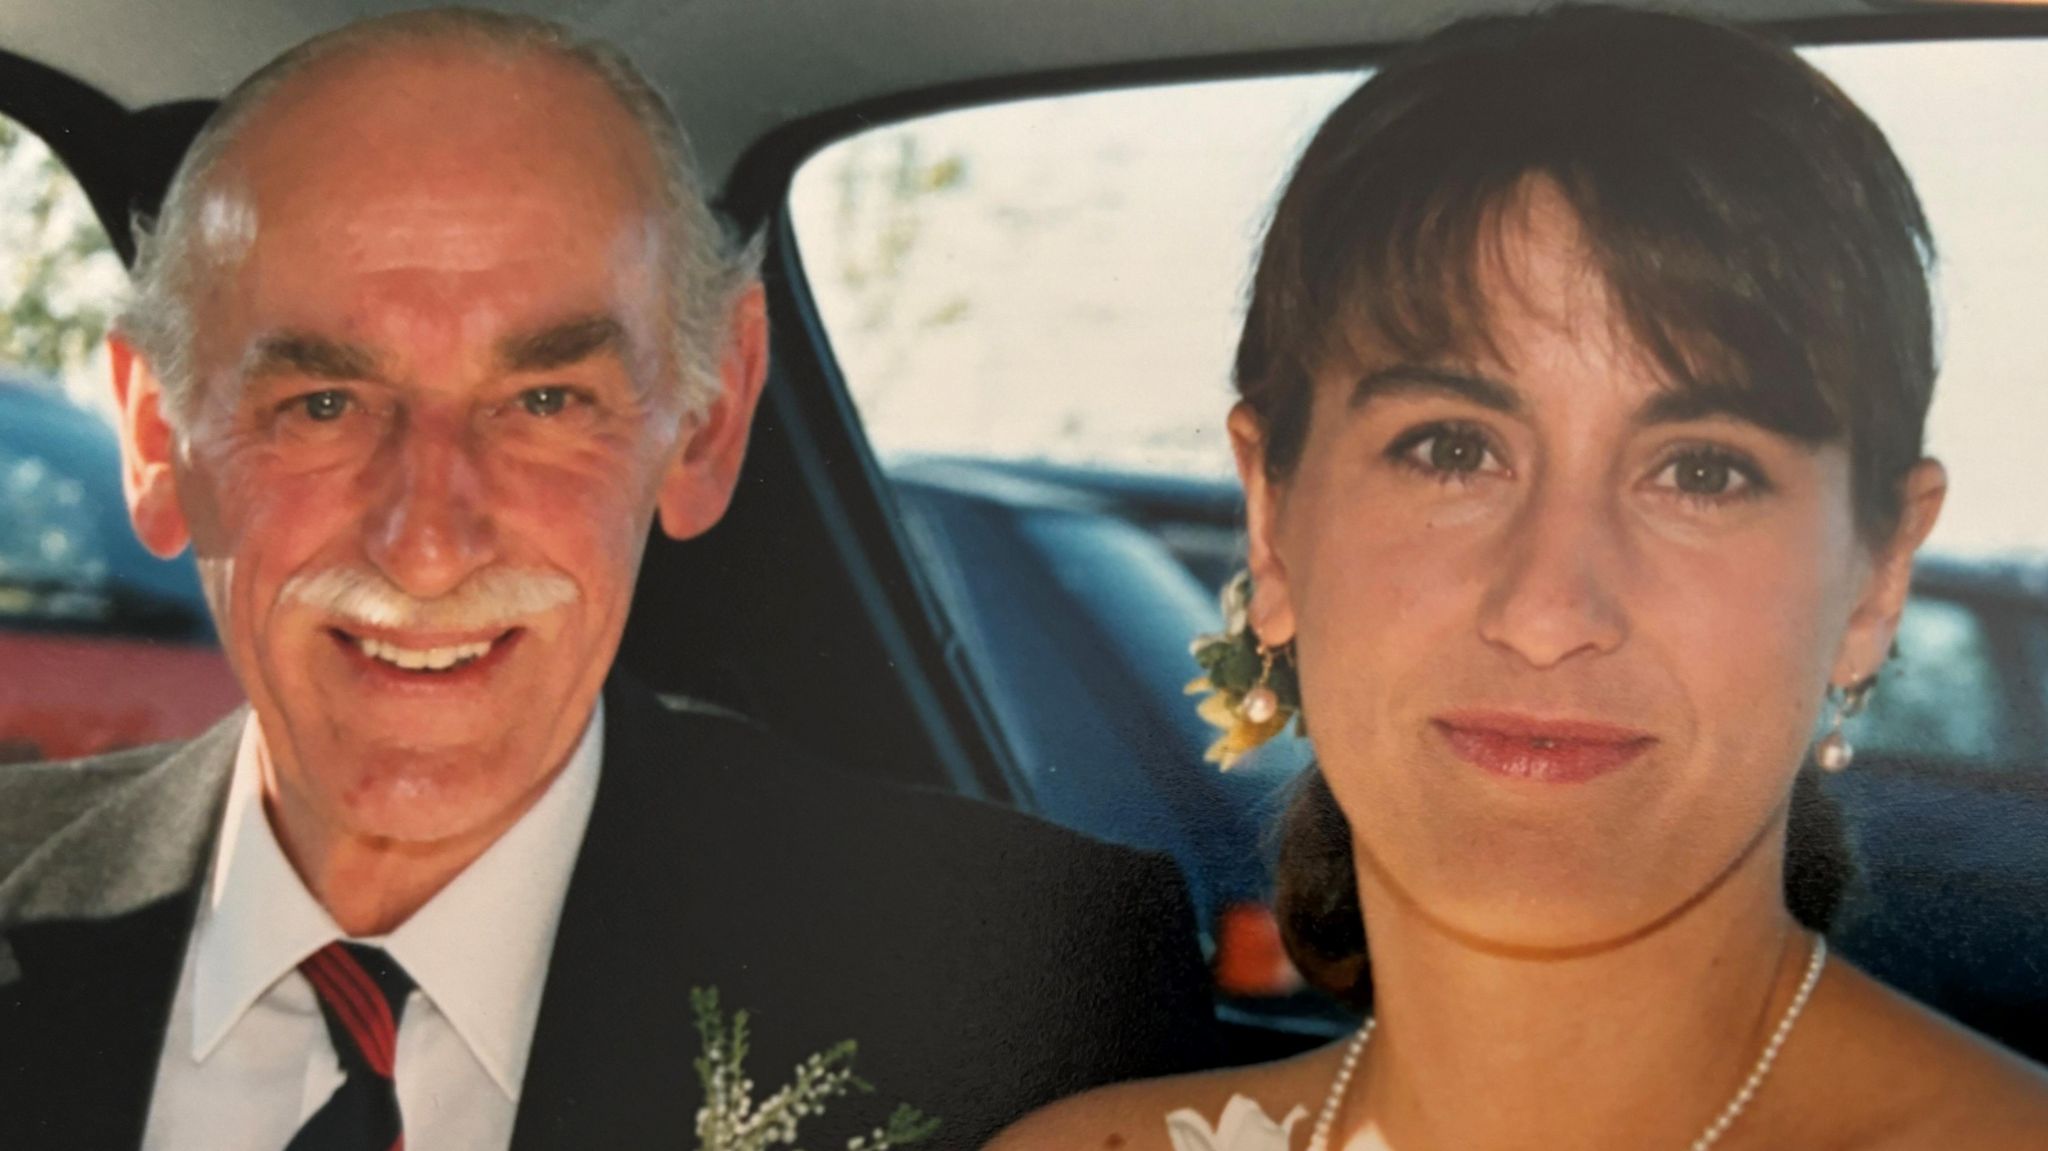 Kirsty Wark with her father on her wedding day